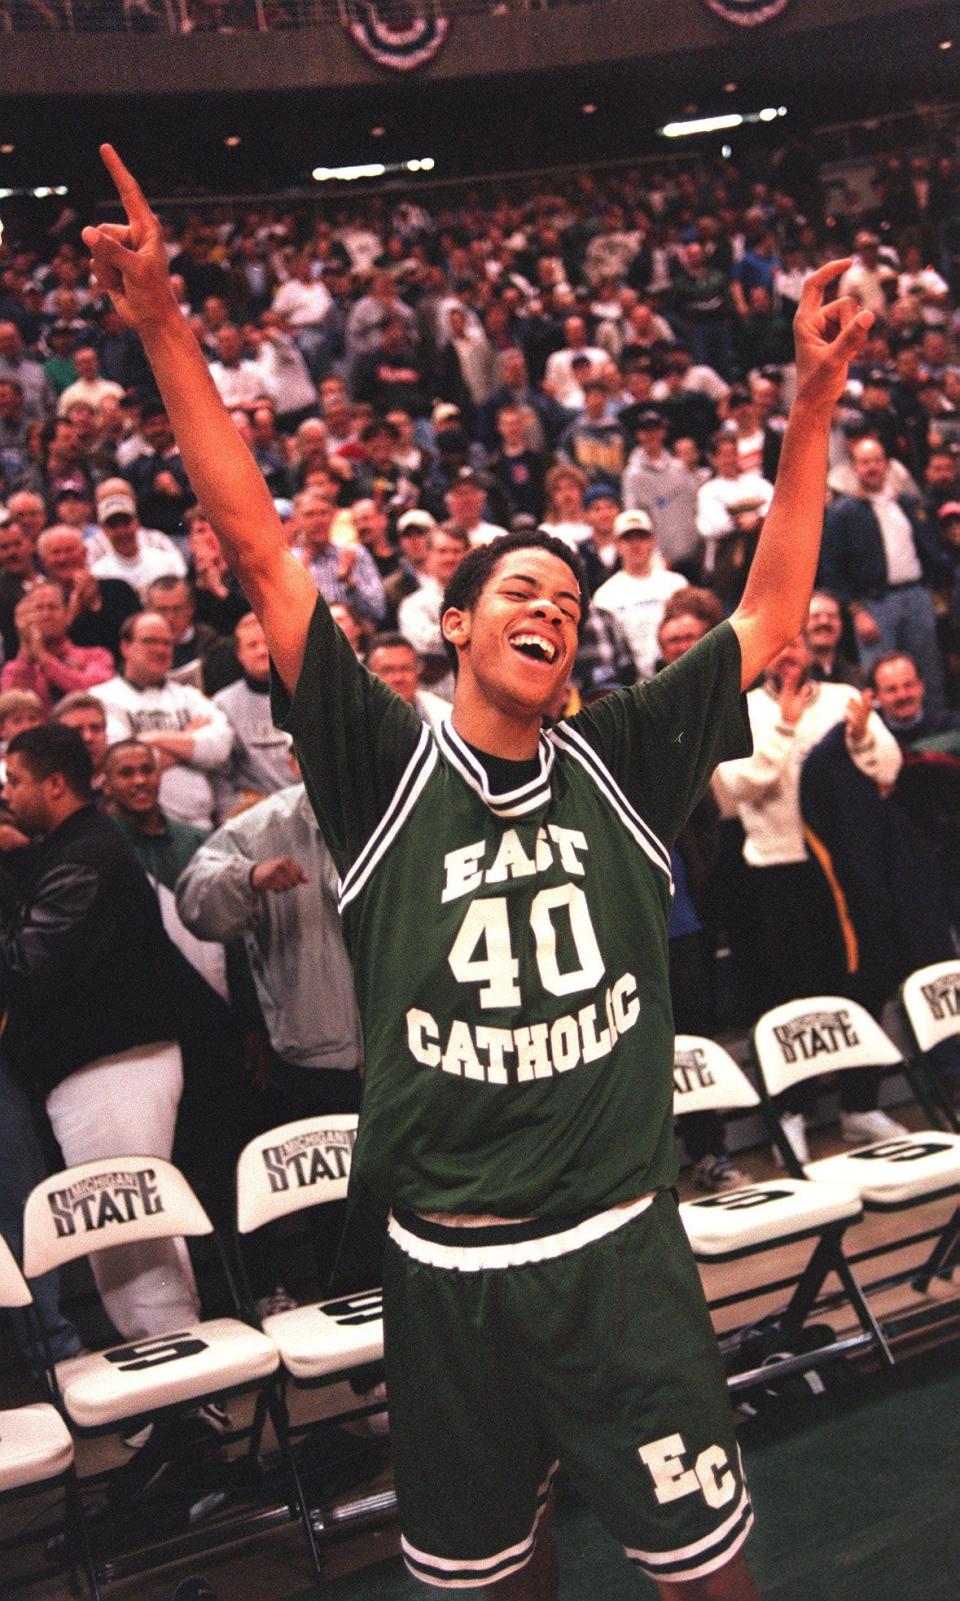 Detroit East Catholic's Andrew Mitchell celebrates after scoring the winning bucket with seconds left in the 1997 Class D finals against Wyoming Tri-Unity Christian.